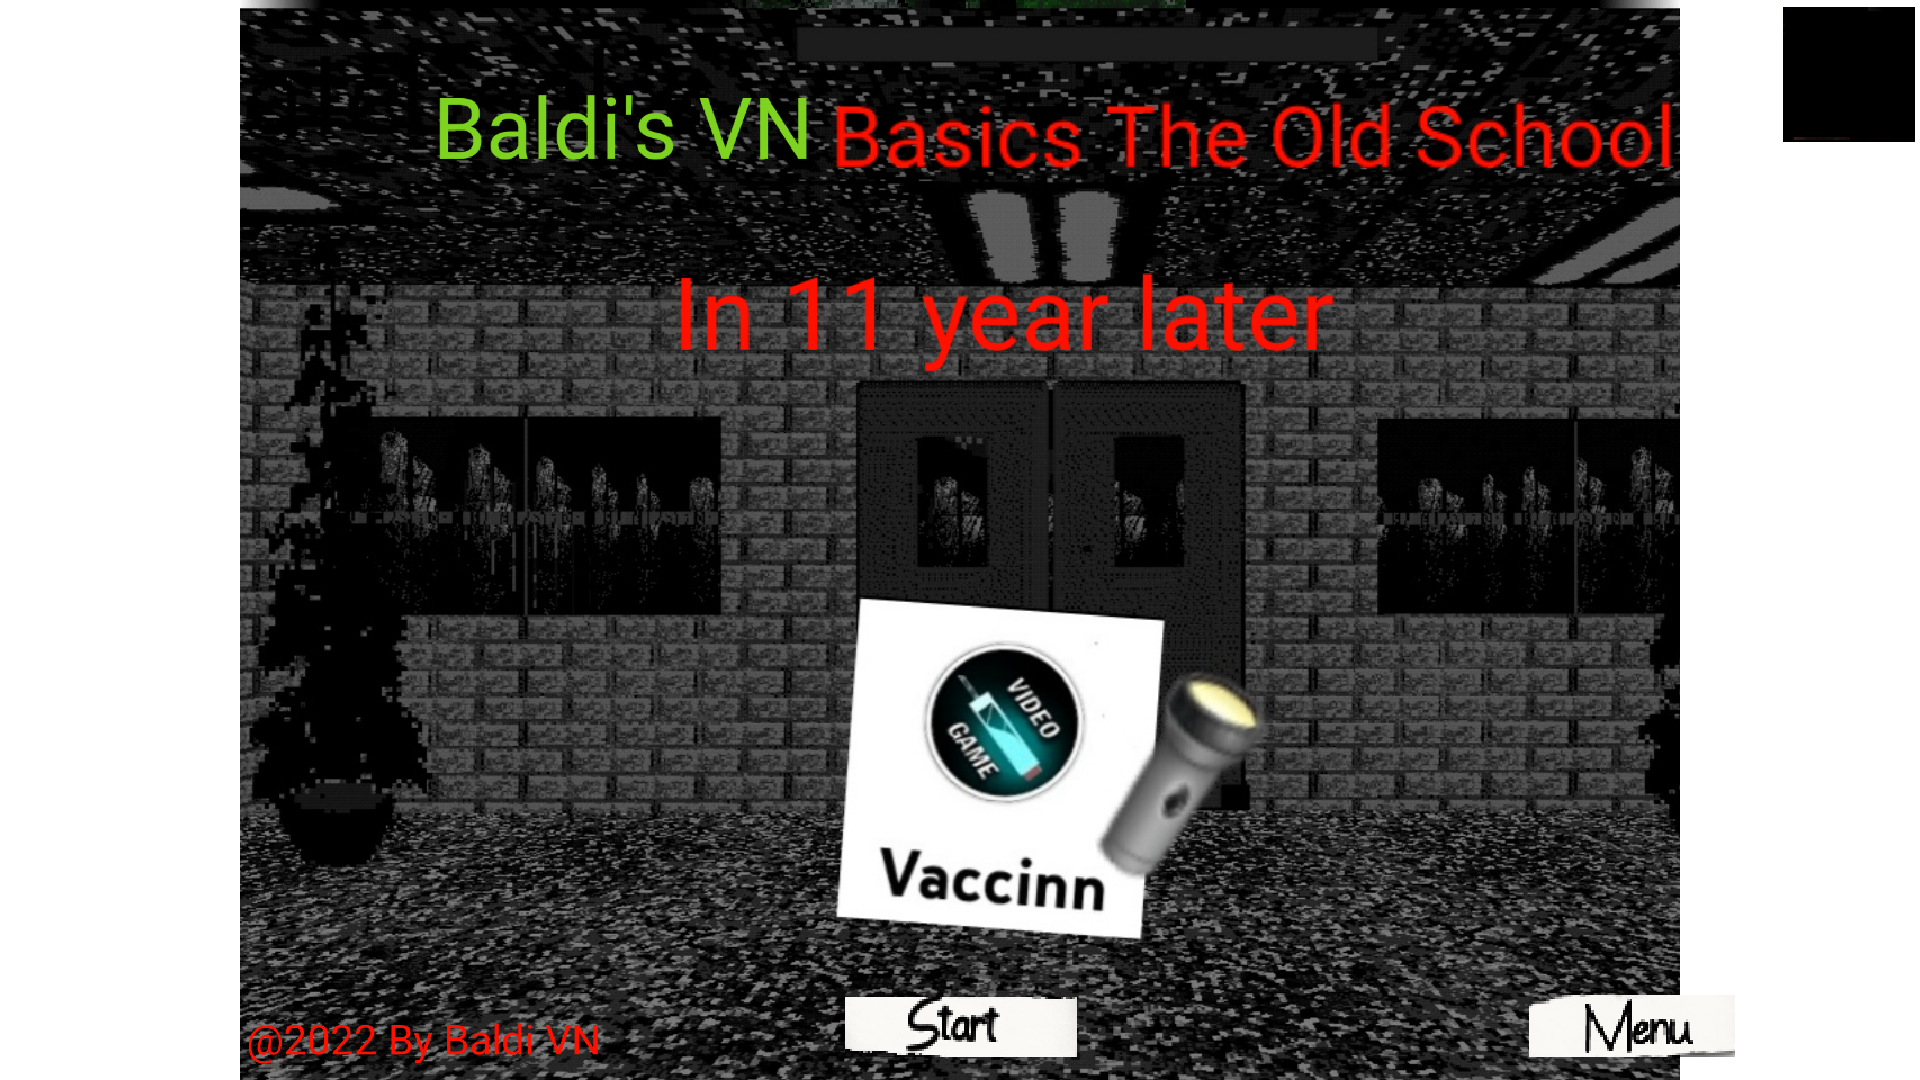 Baldi's VN Basics The Old School In 11 Year Later